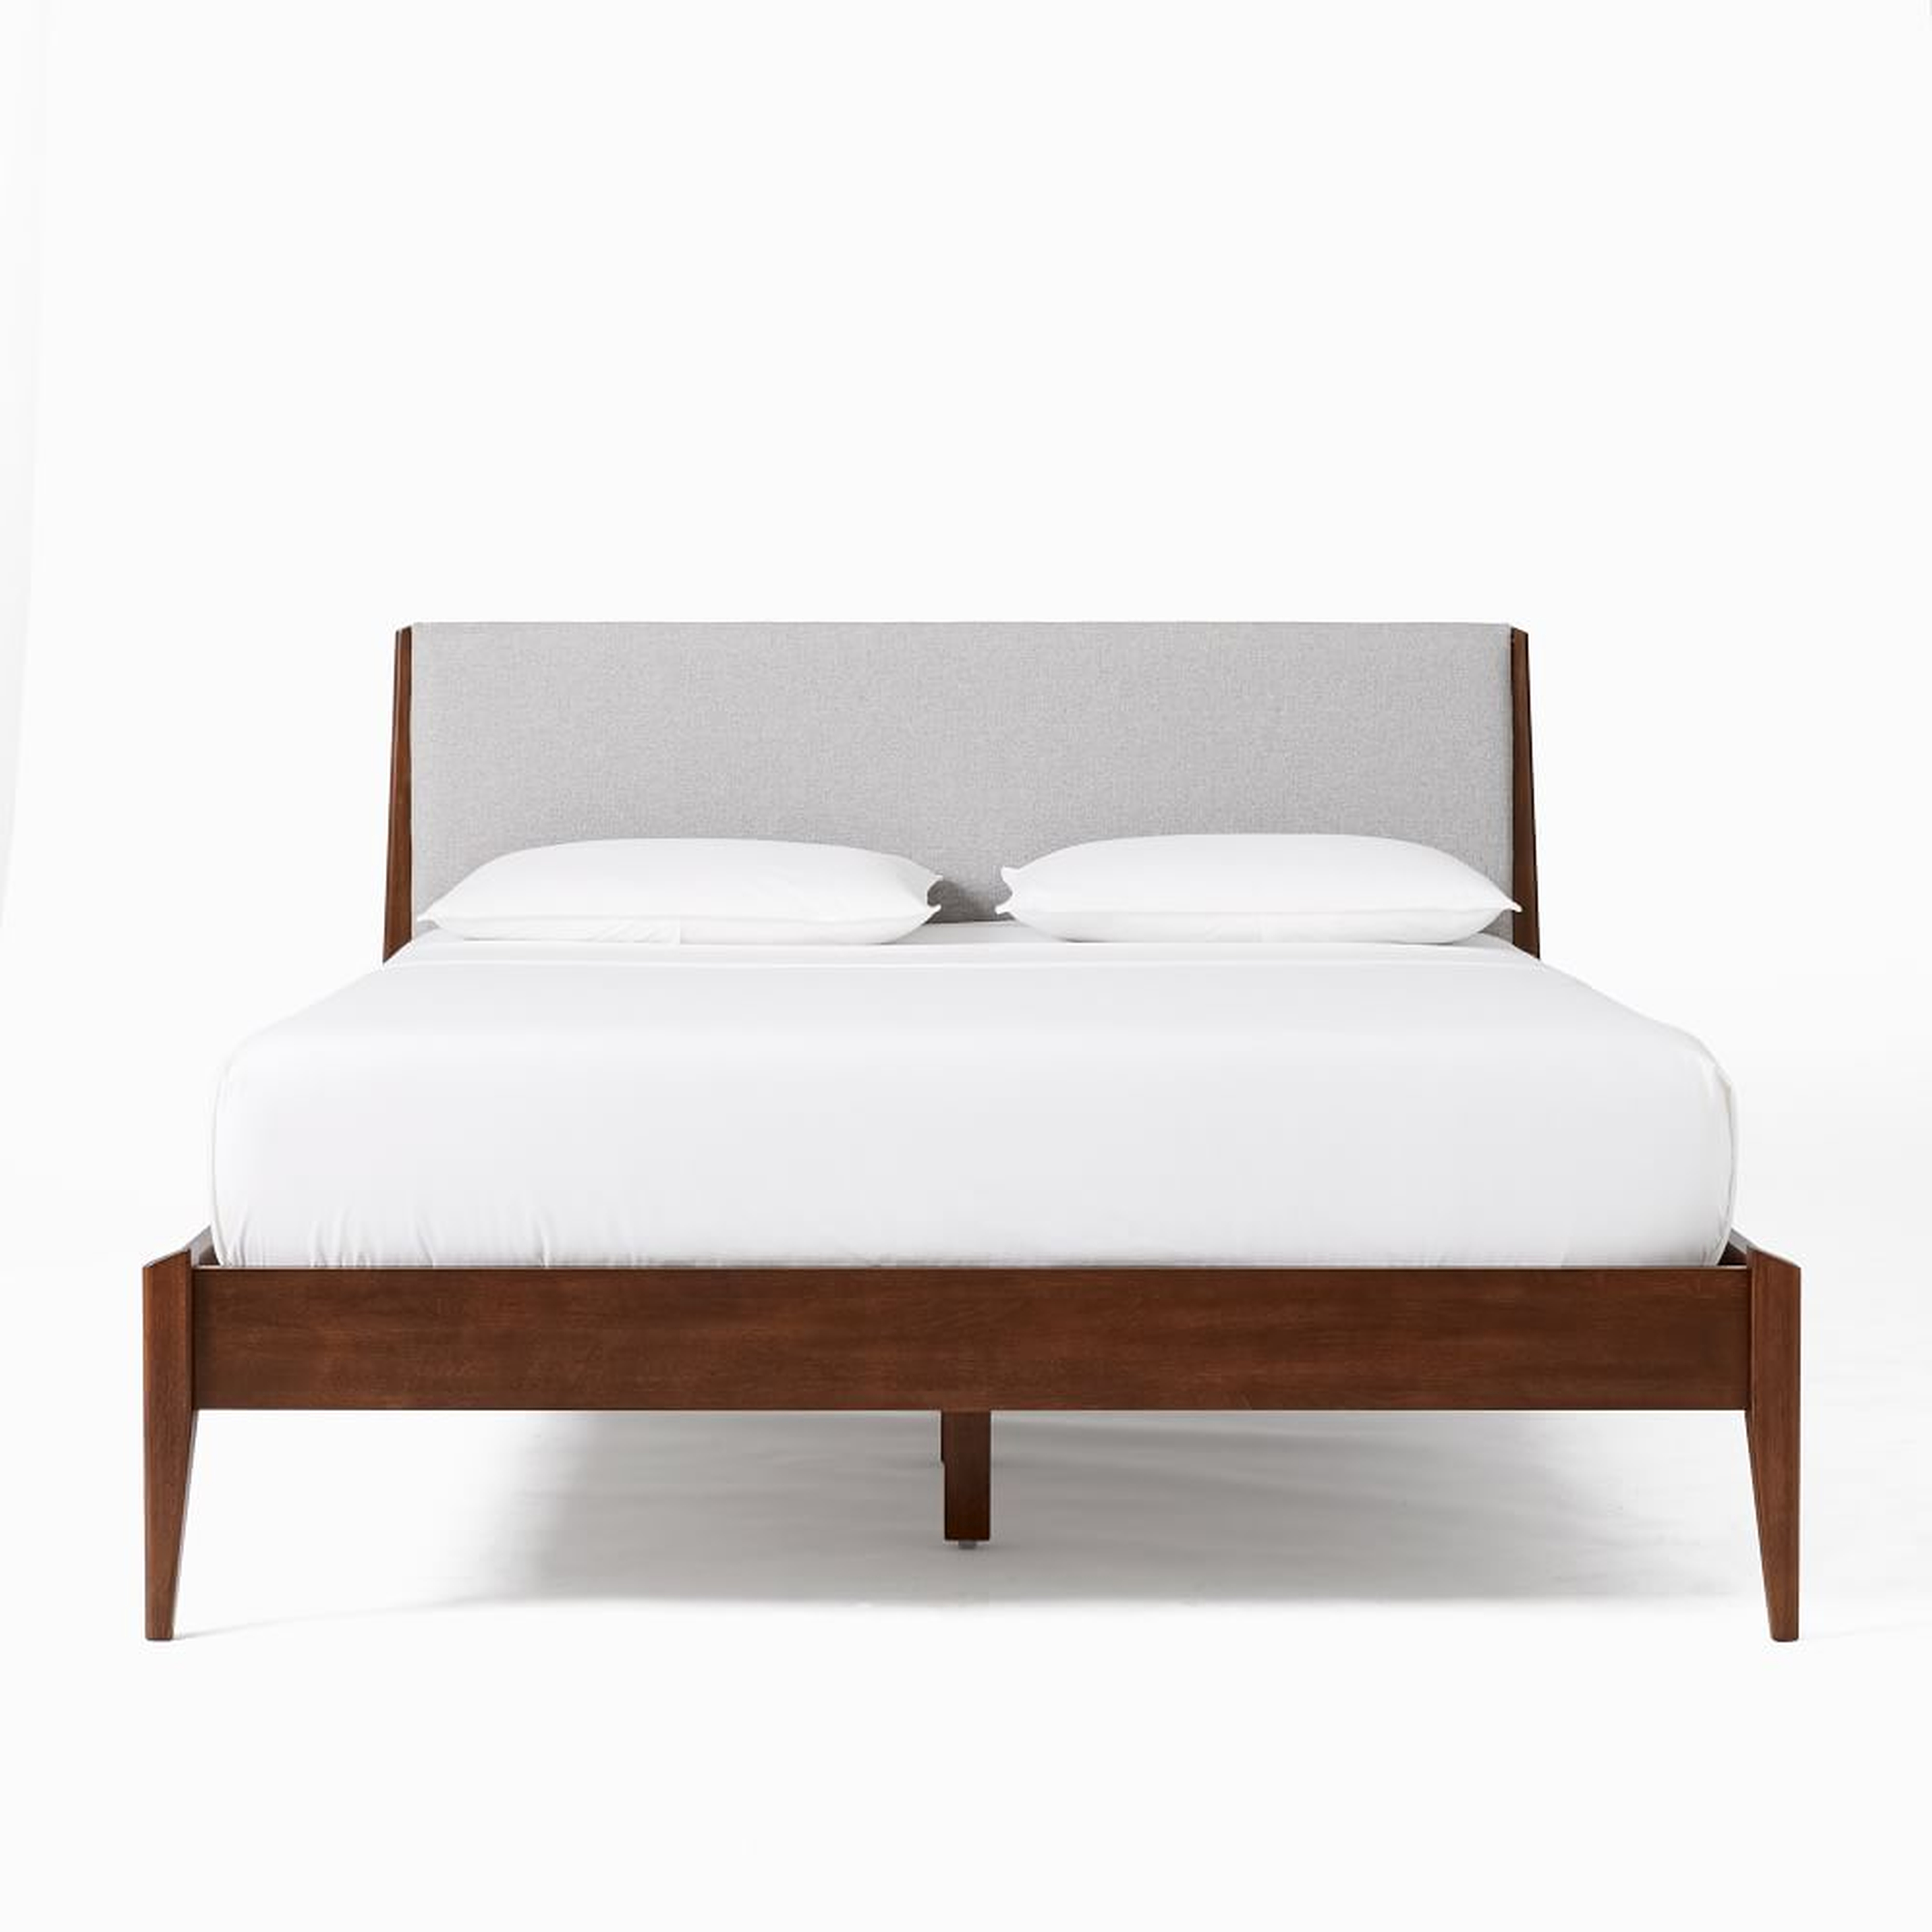 Modern Show Wood Bed, V2 Single Box Queen, Chenille Tweed, Silver - West Elm